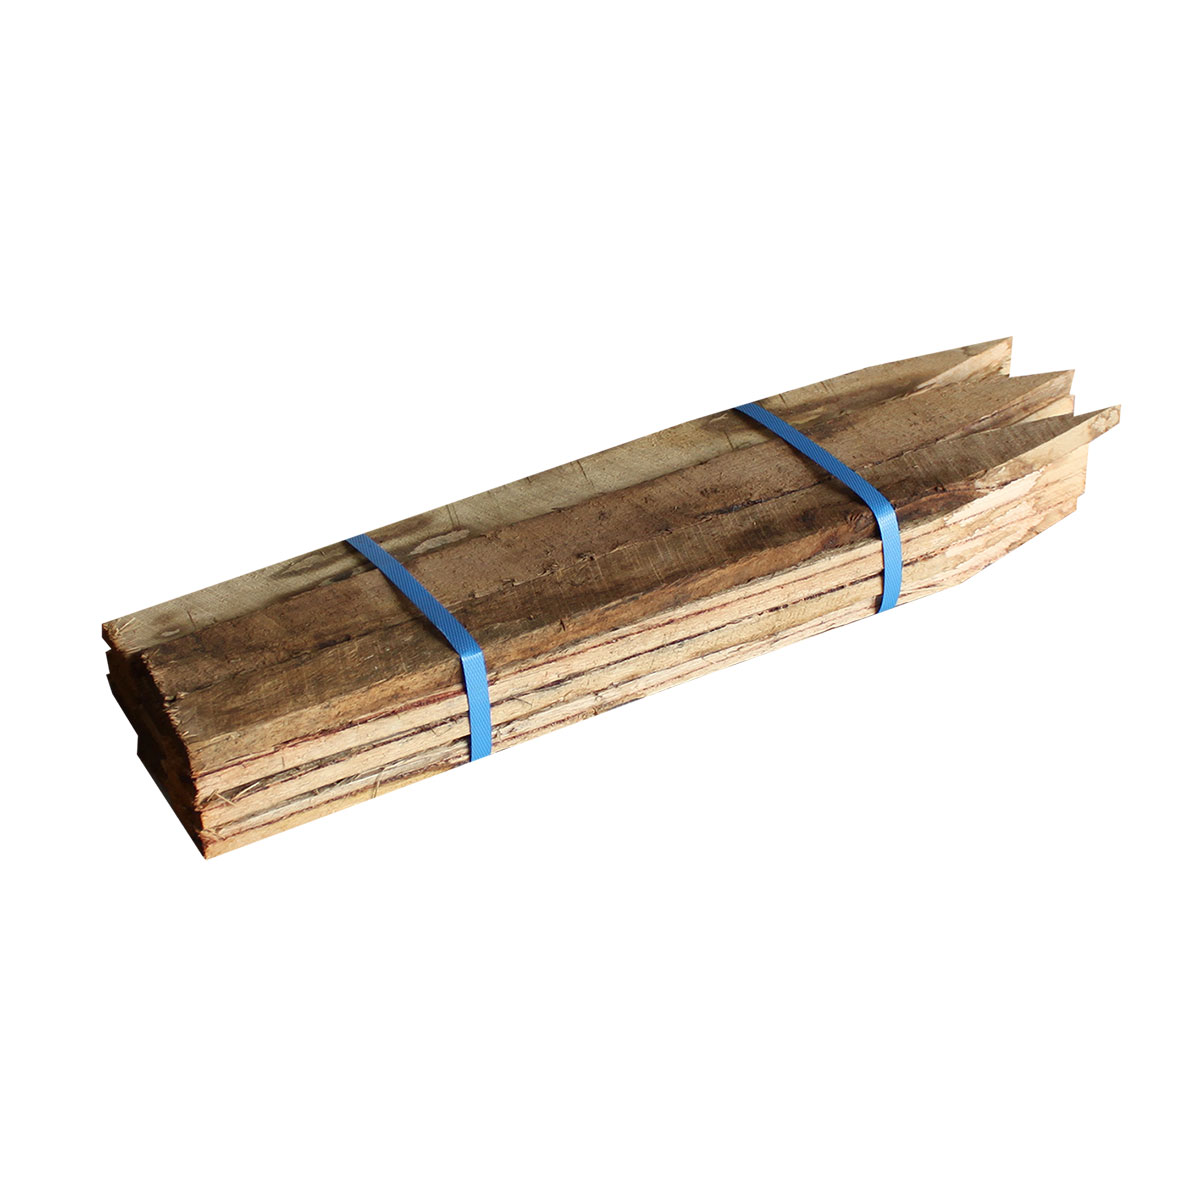 Hardwood Stakes 50 x 13 x 600mm - 12 Pack